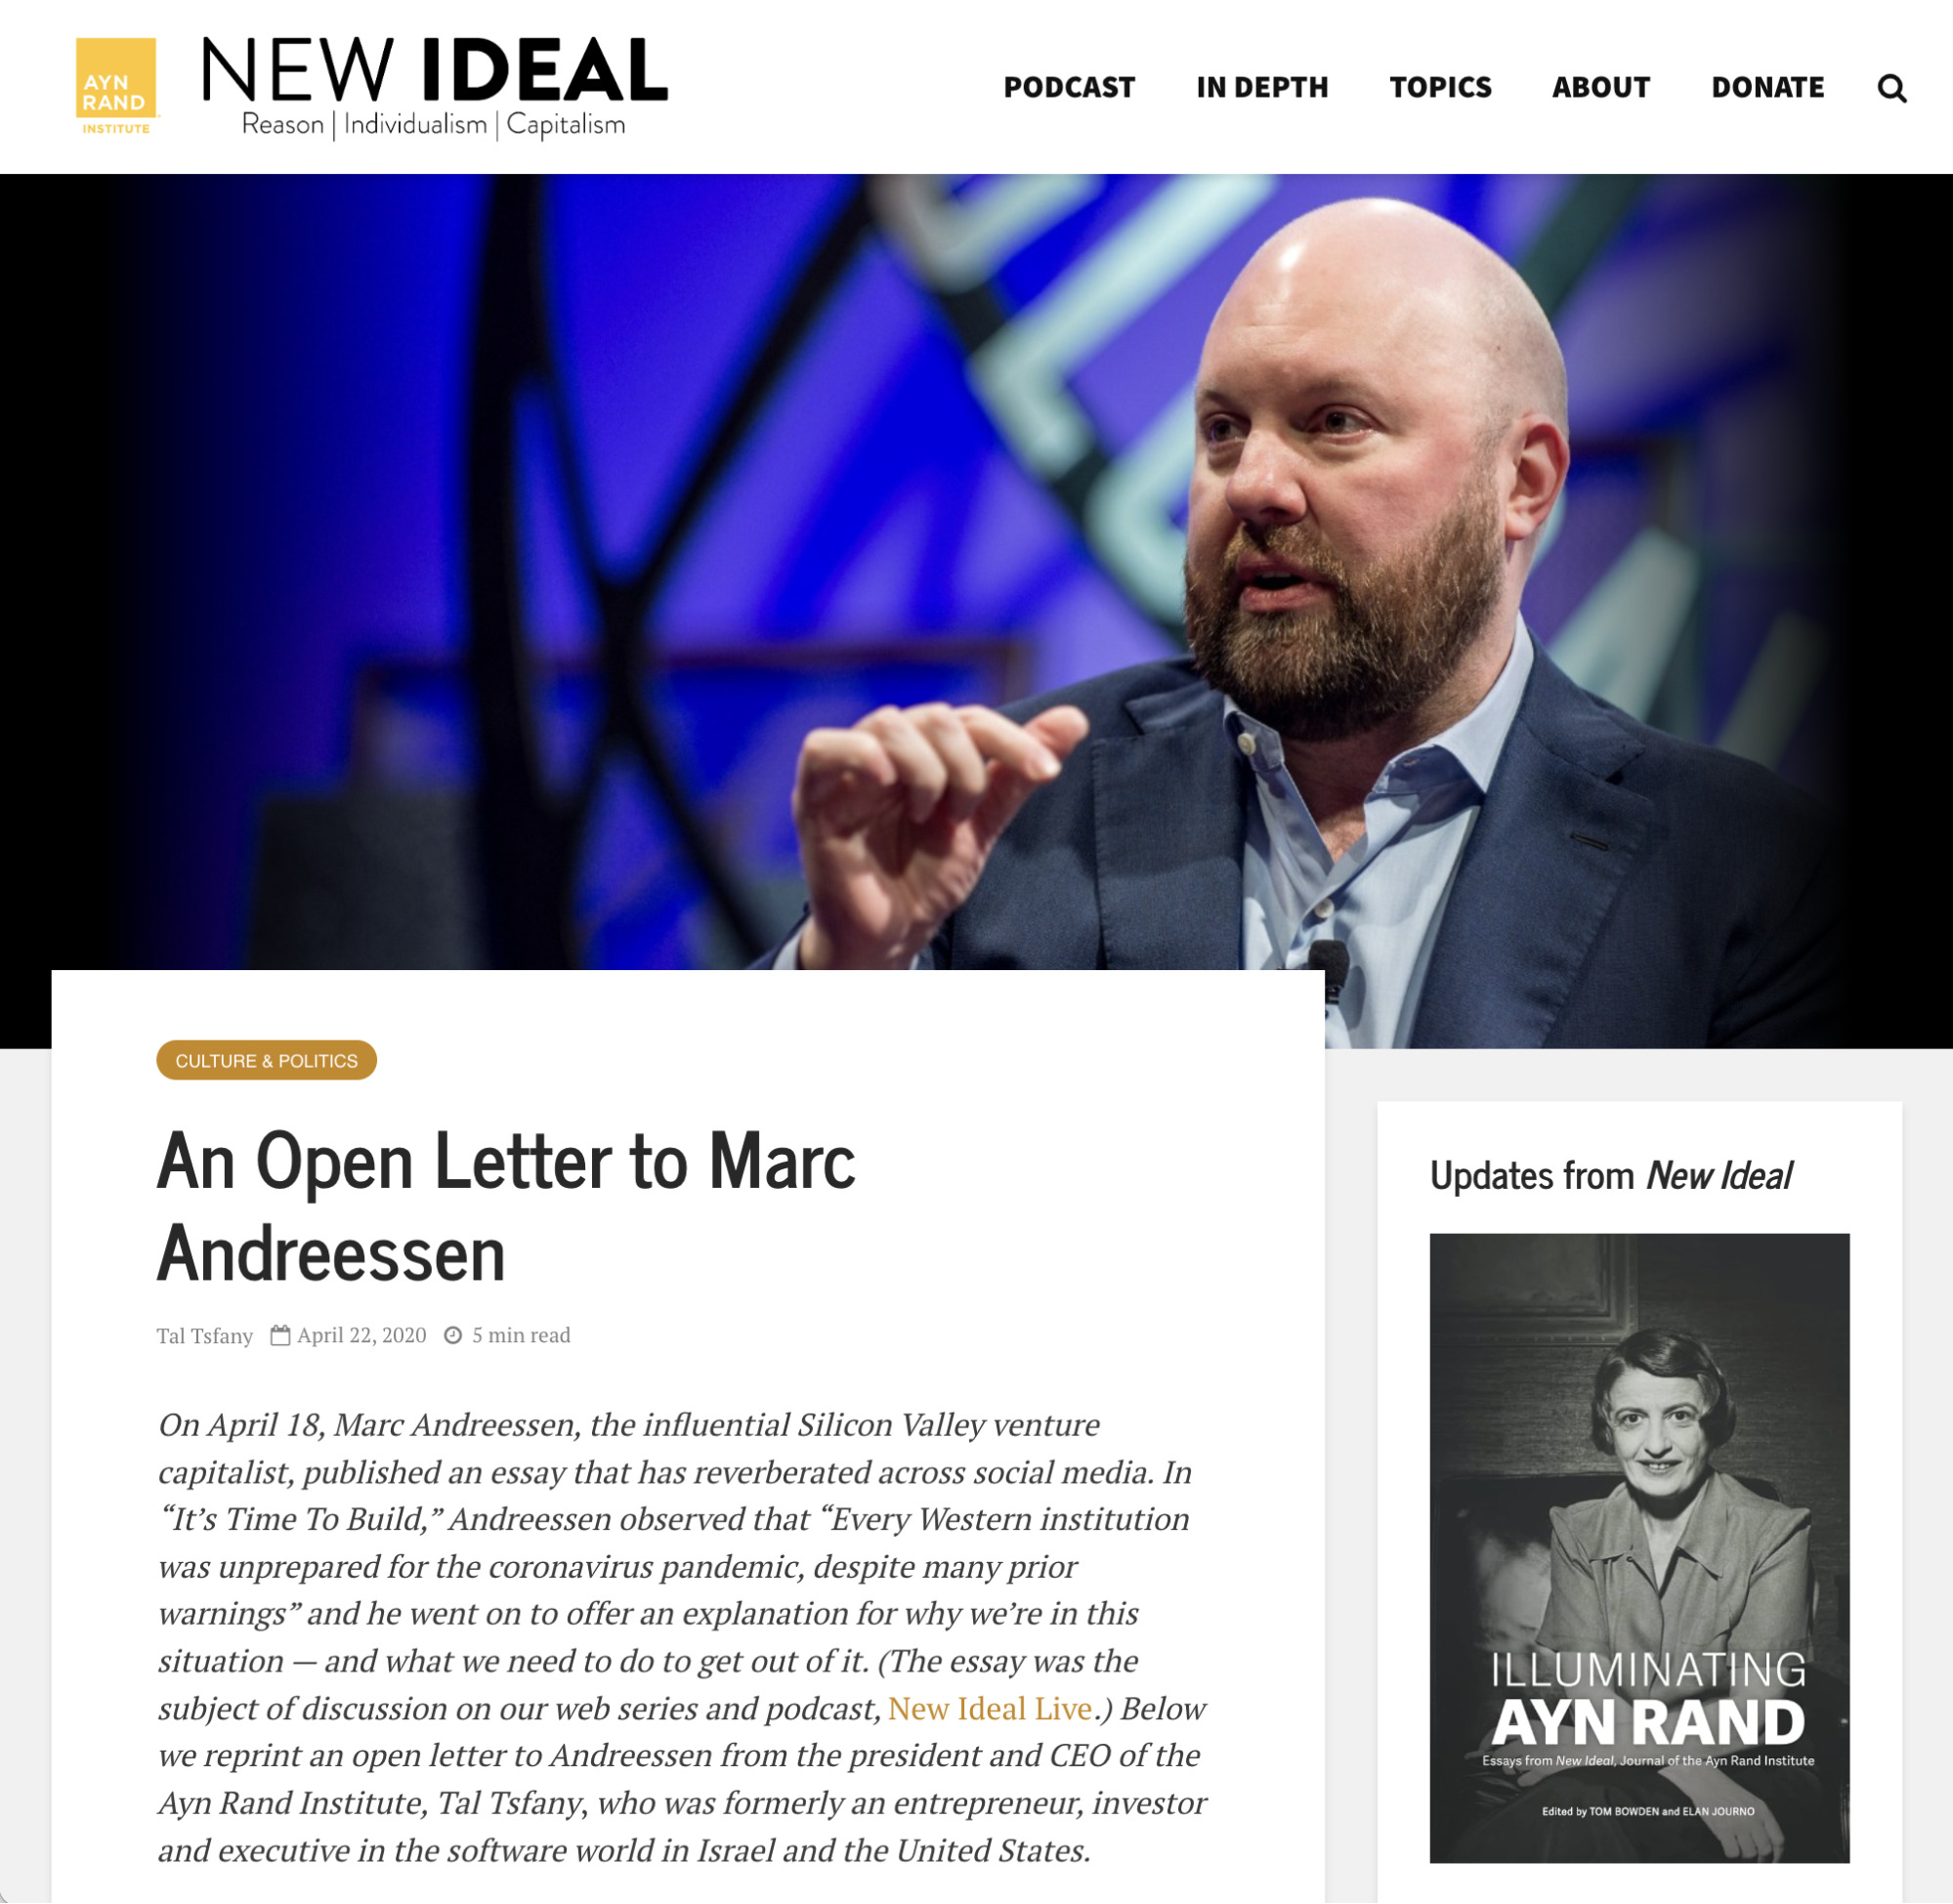 Screenshot of New Ideal website featuring article An Open Letter to Marc Andreessen